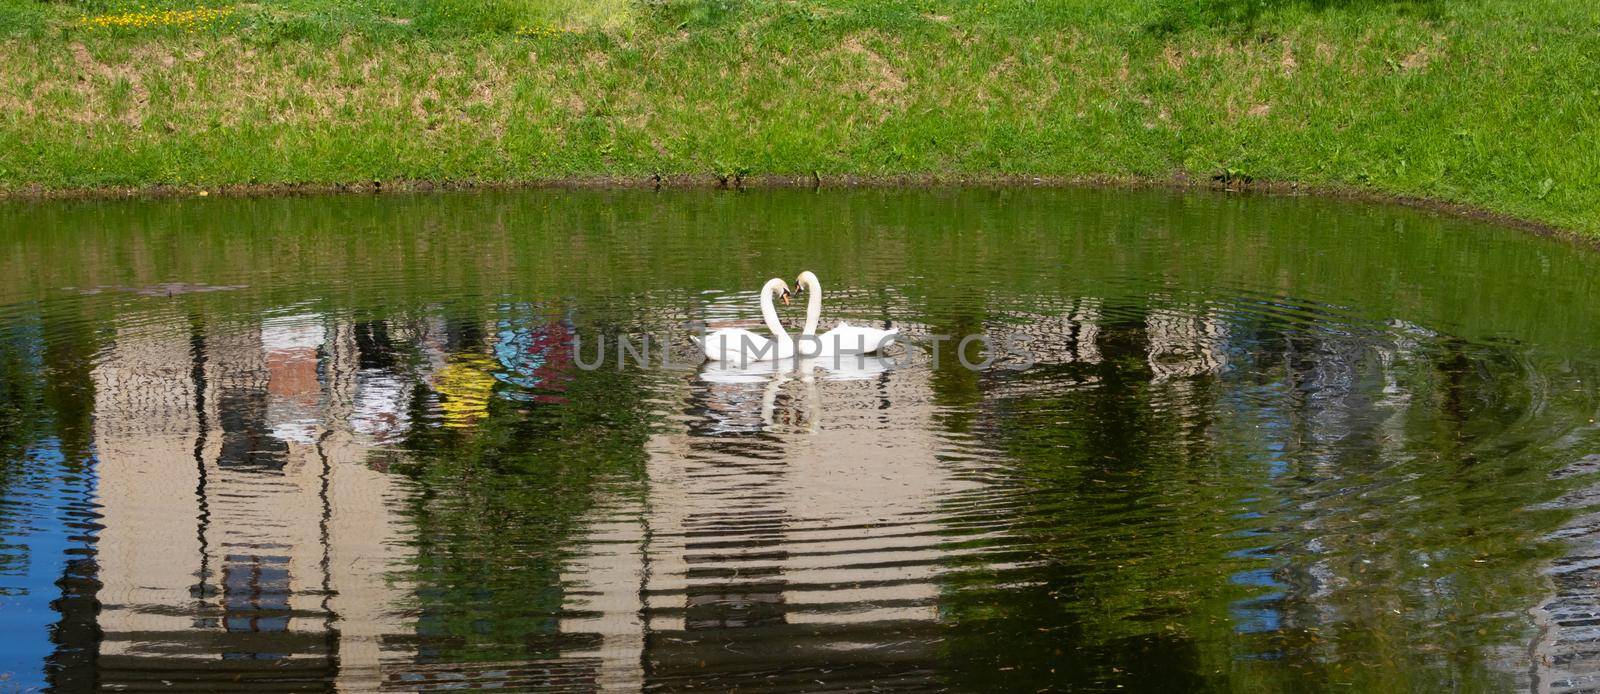 In the park on the city pond, floating swans arched their necks in the shape of hearts.